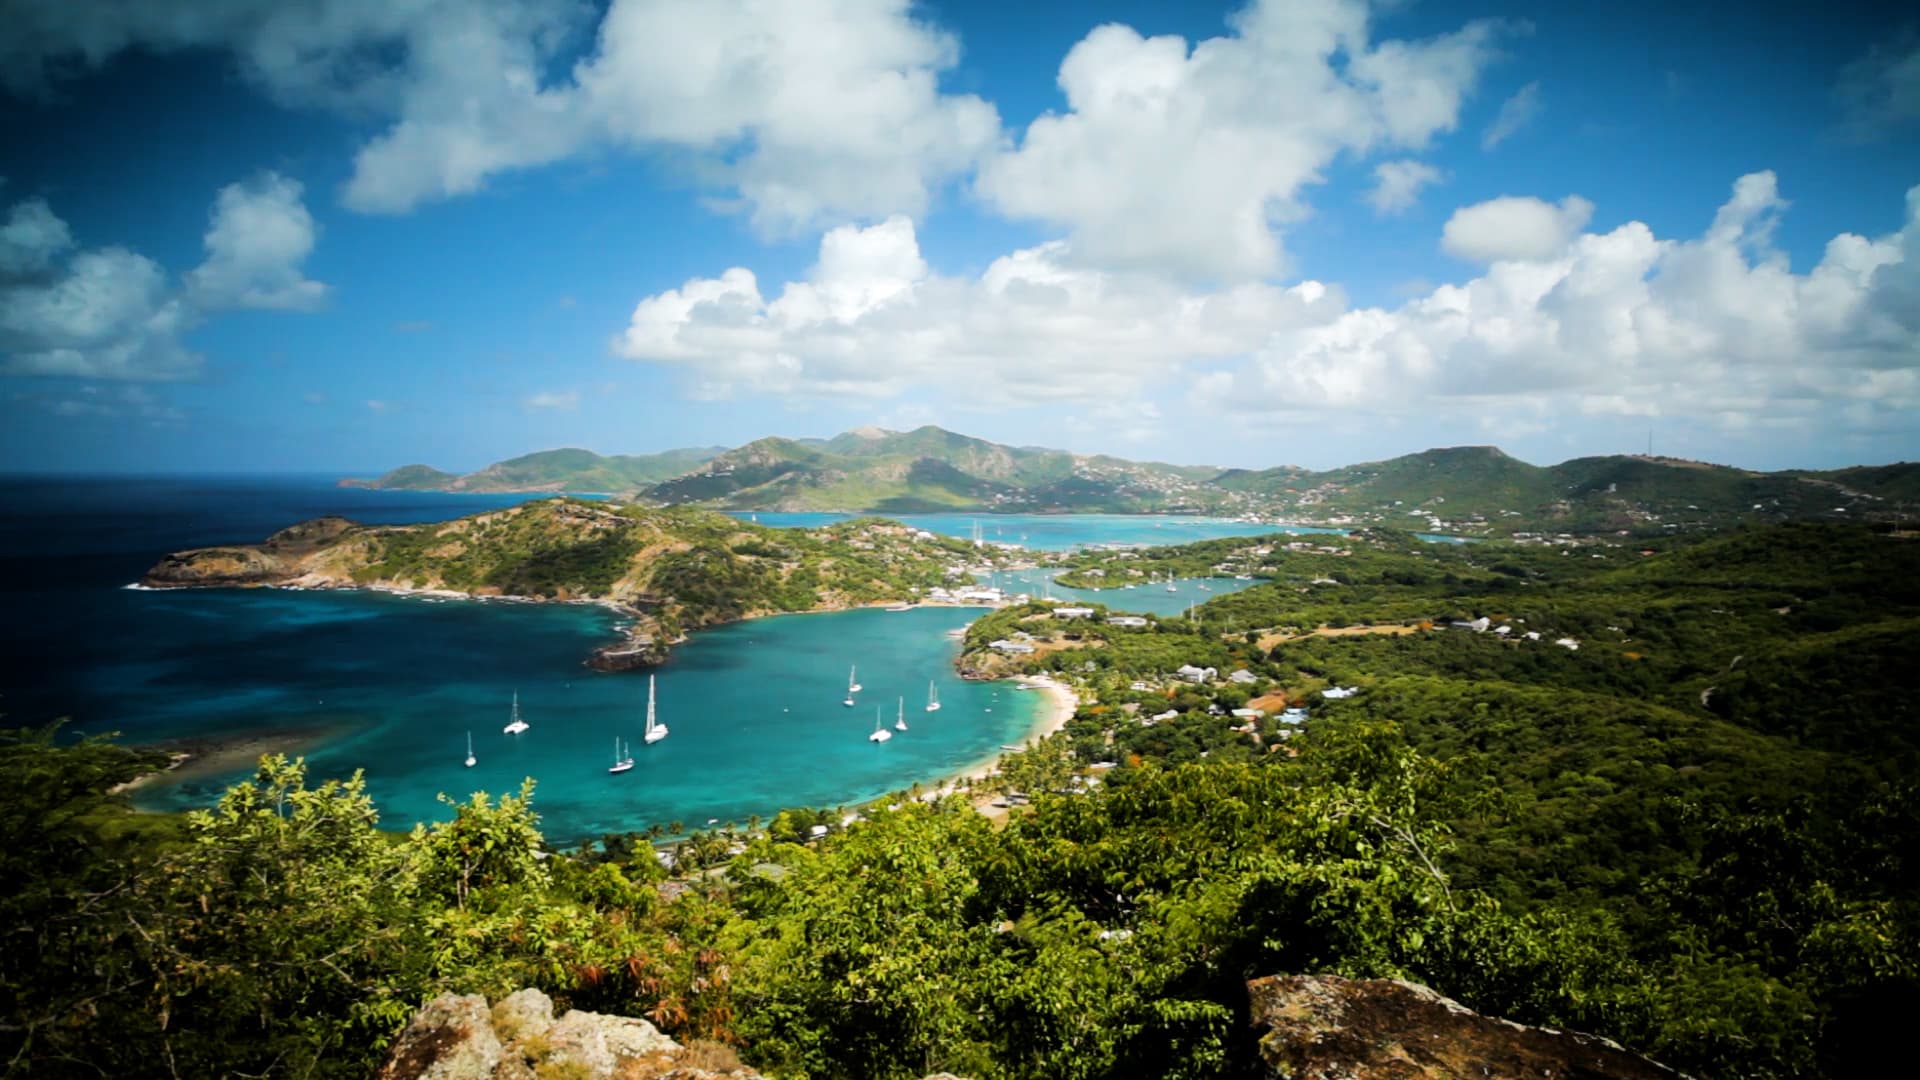 Antigua, an island in the eastern Caribbean Sea, is famous for its beautiful weather and 365 beaches.